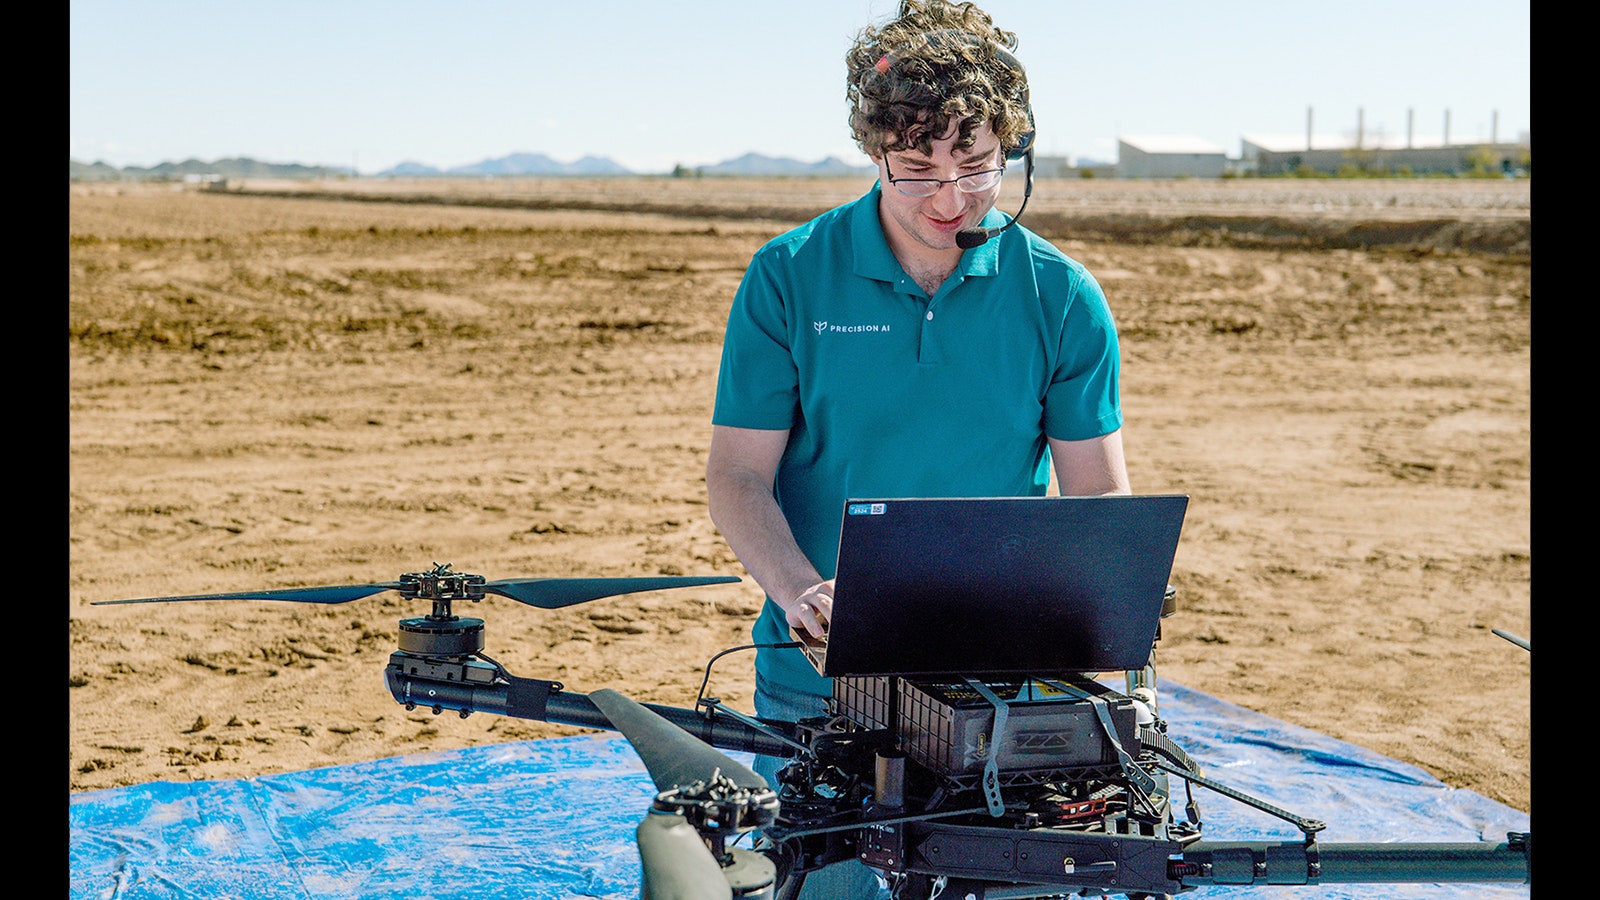 A staffer from Precision AI works with a drone the company operates to detect heavy spurge, an invasive weed.